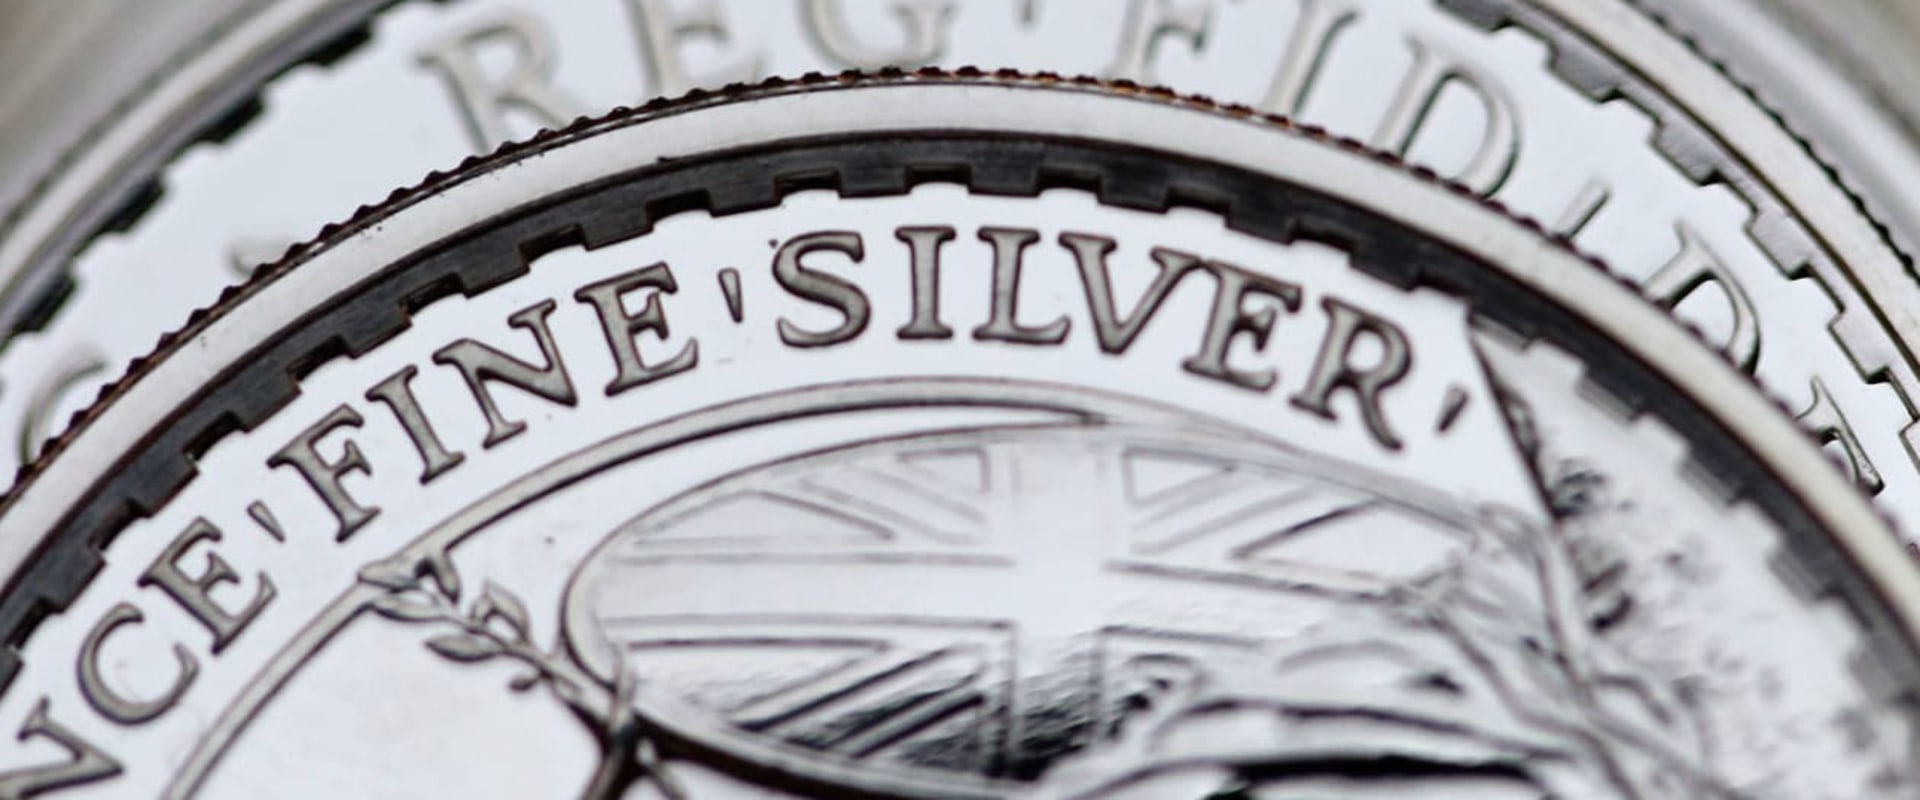 Will silver ever be worth $100?